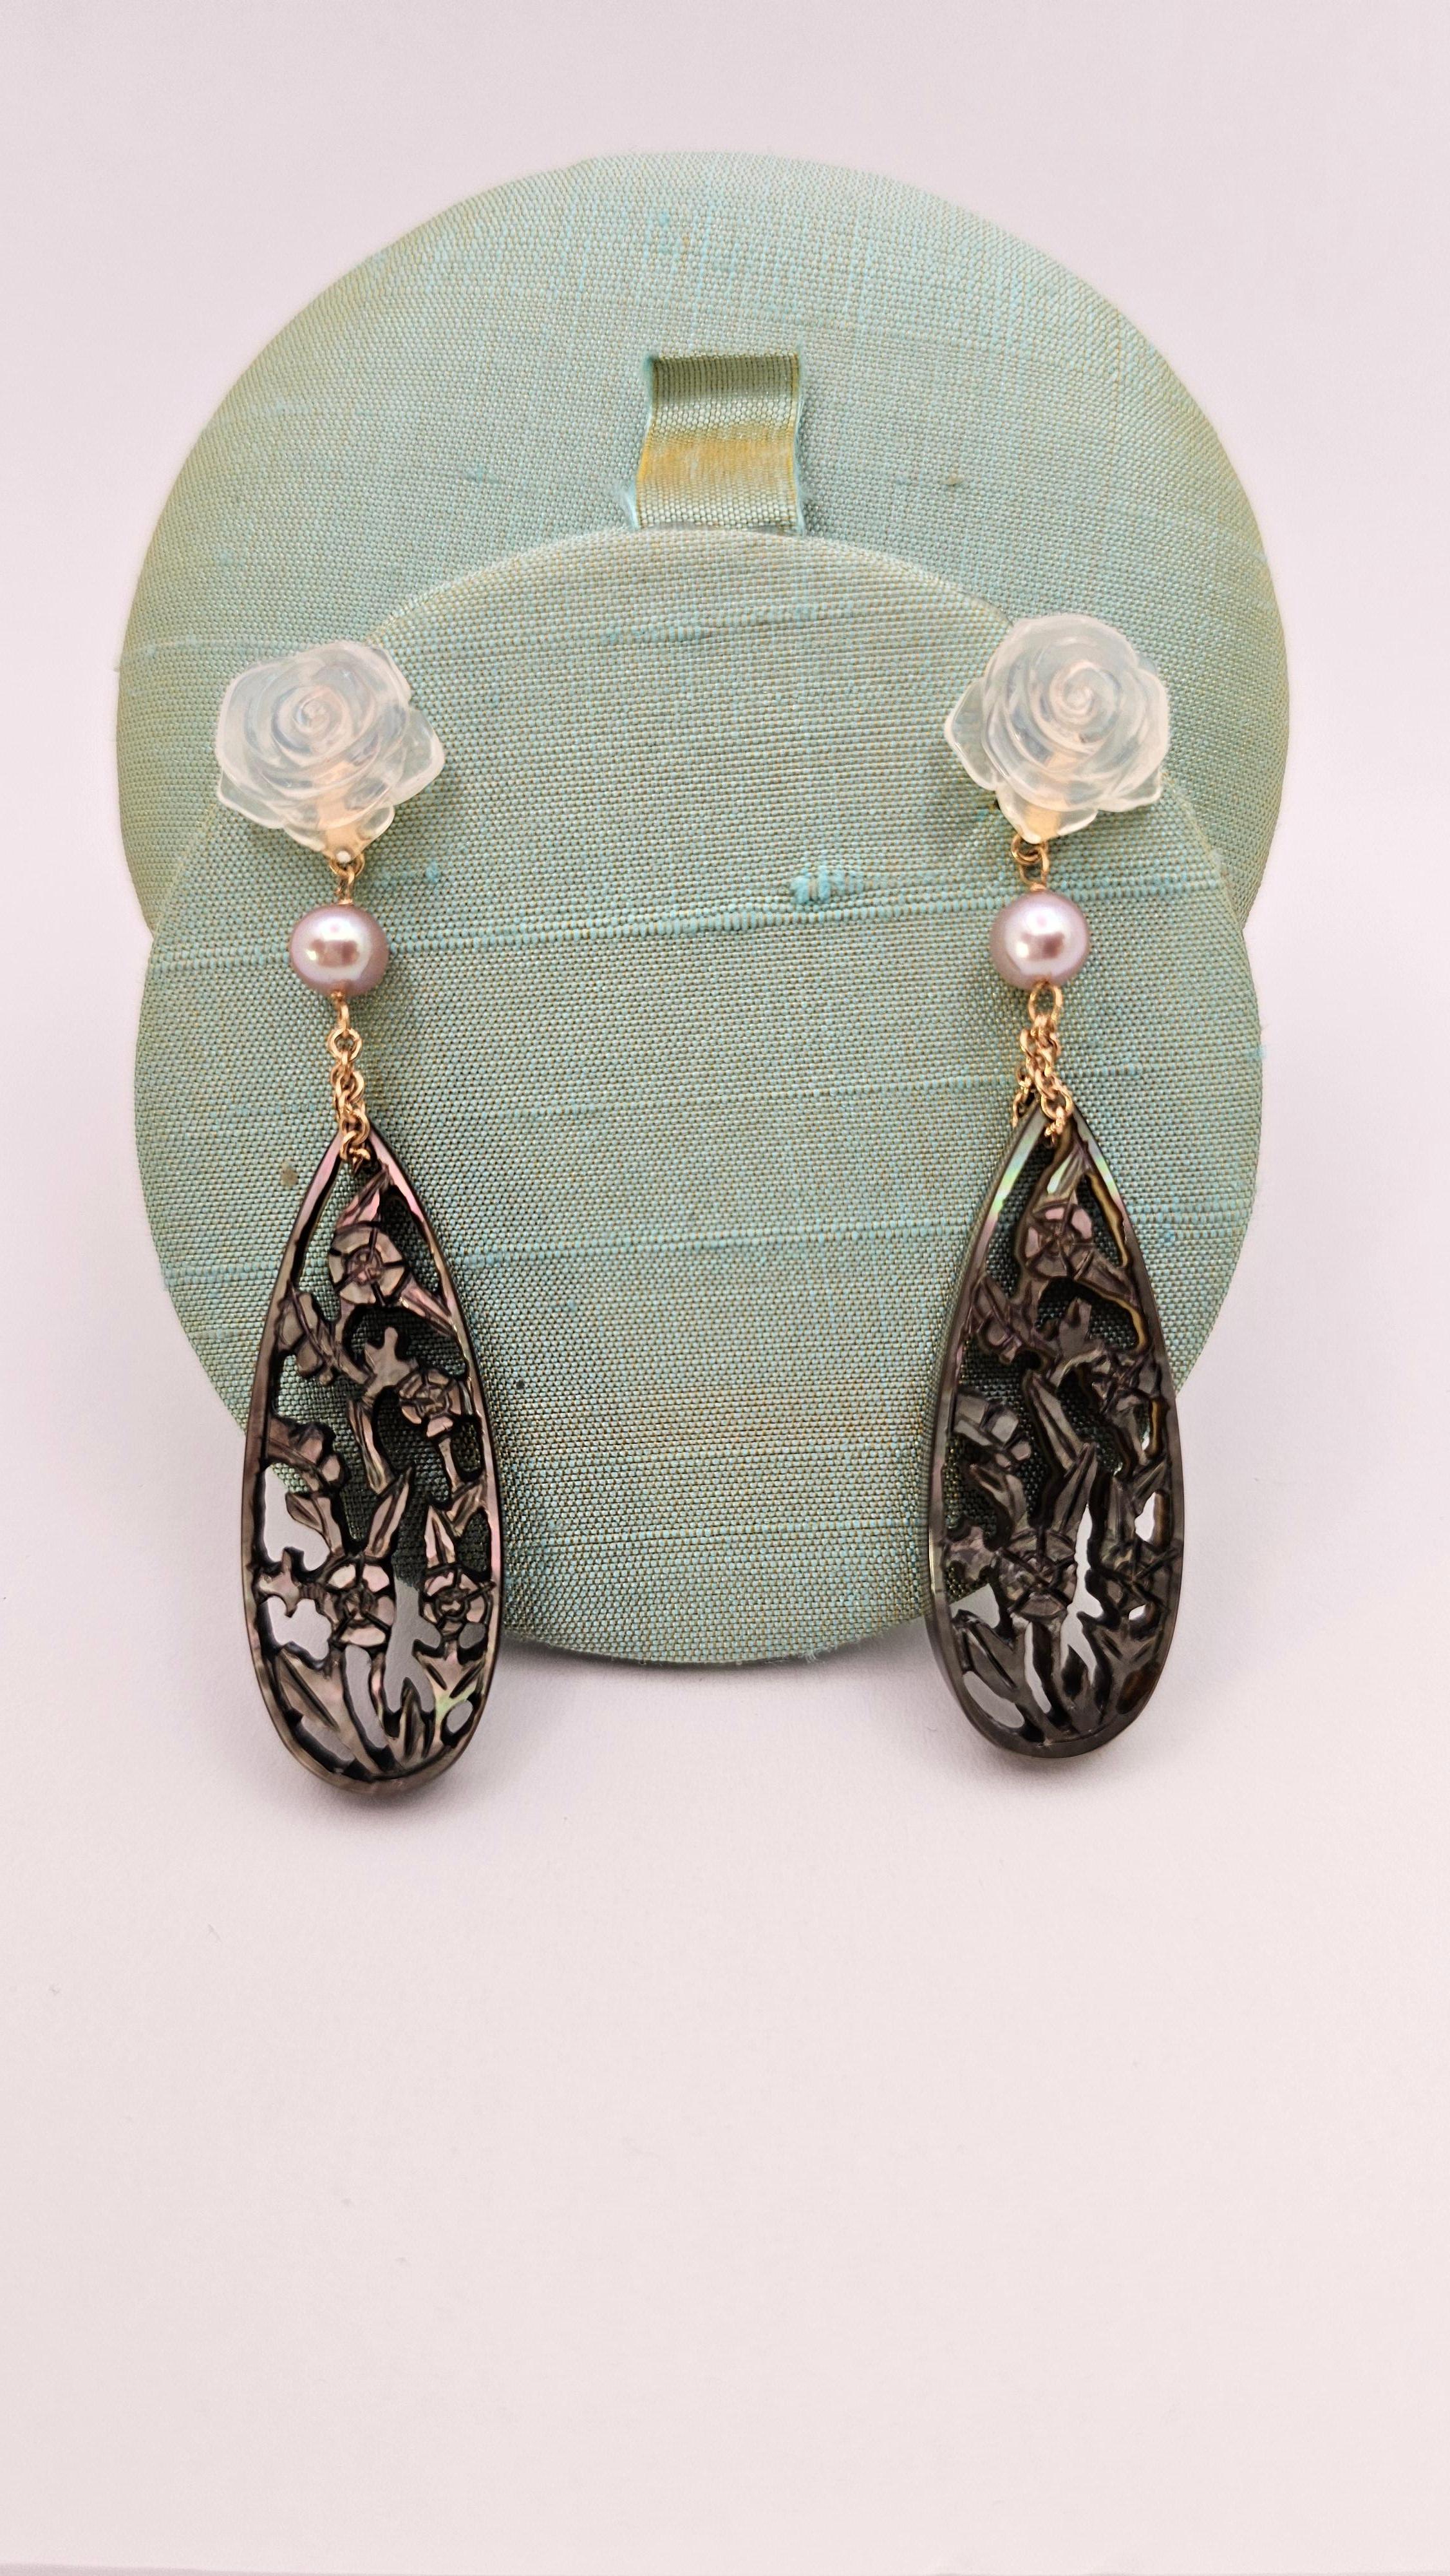 Dark Mother of Pearl, Quartz and Pearl Earrings in 18Kt Gold 2